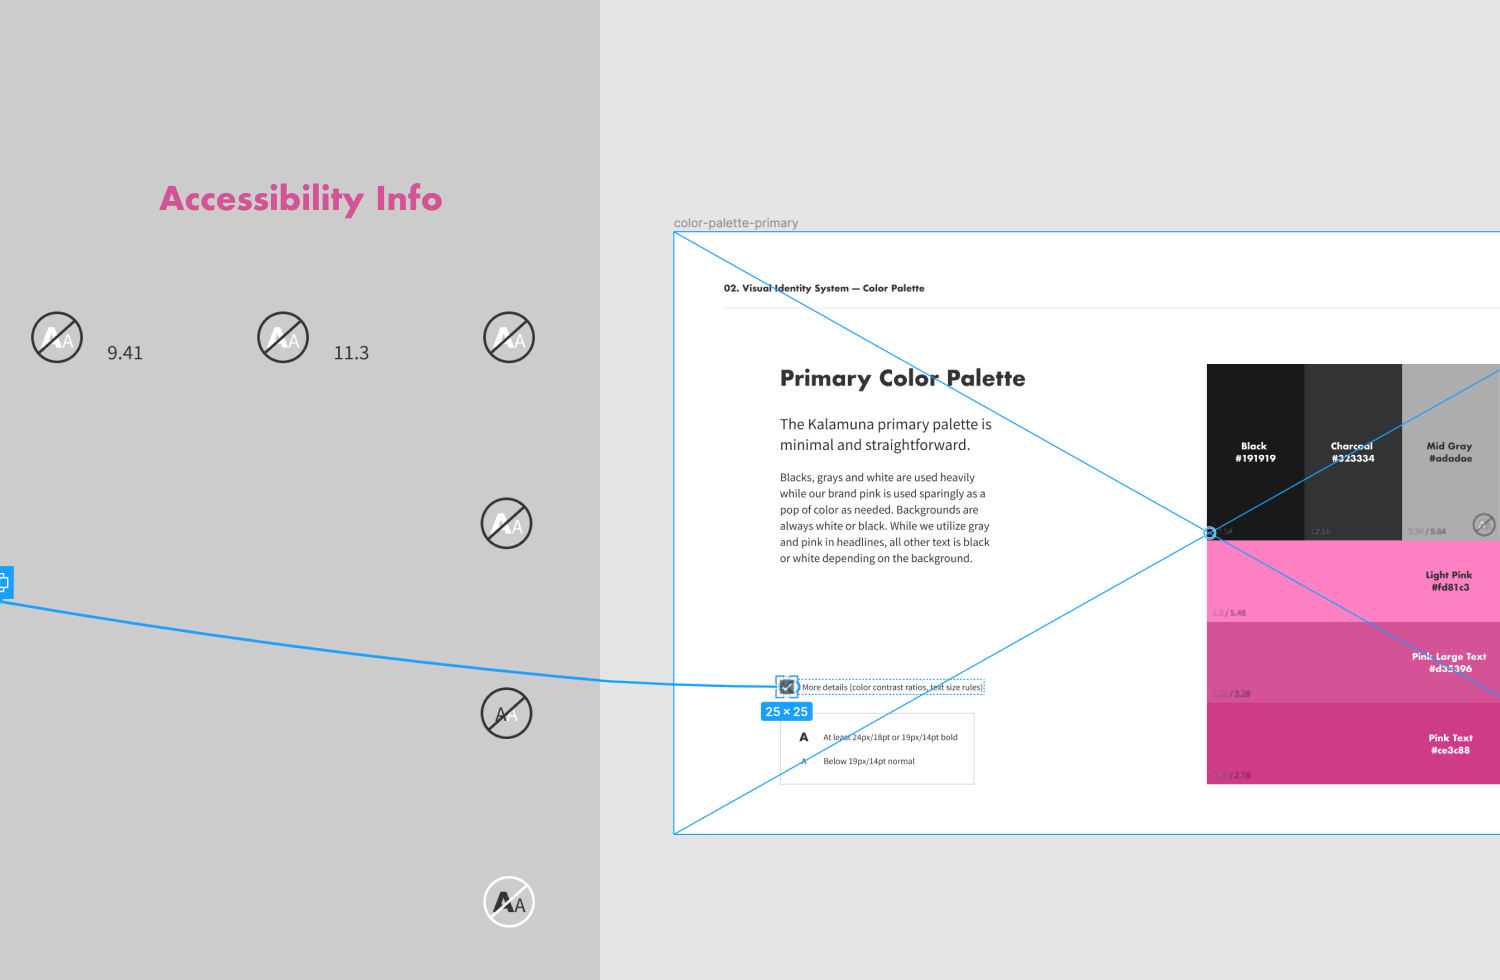 The color palette page of the Kalamuna brand guide in prototype mode. Clicking the checkbox shows and hides accessibility information.